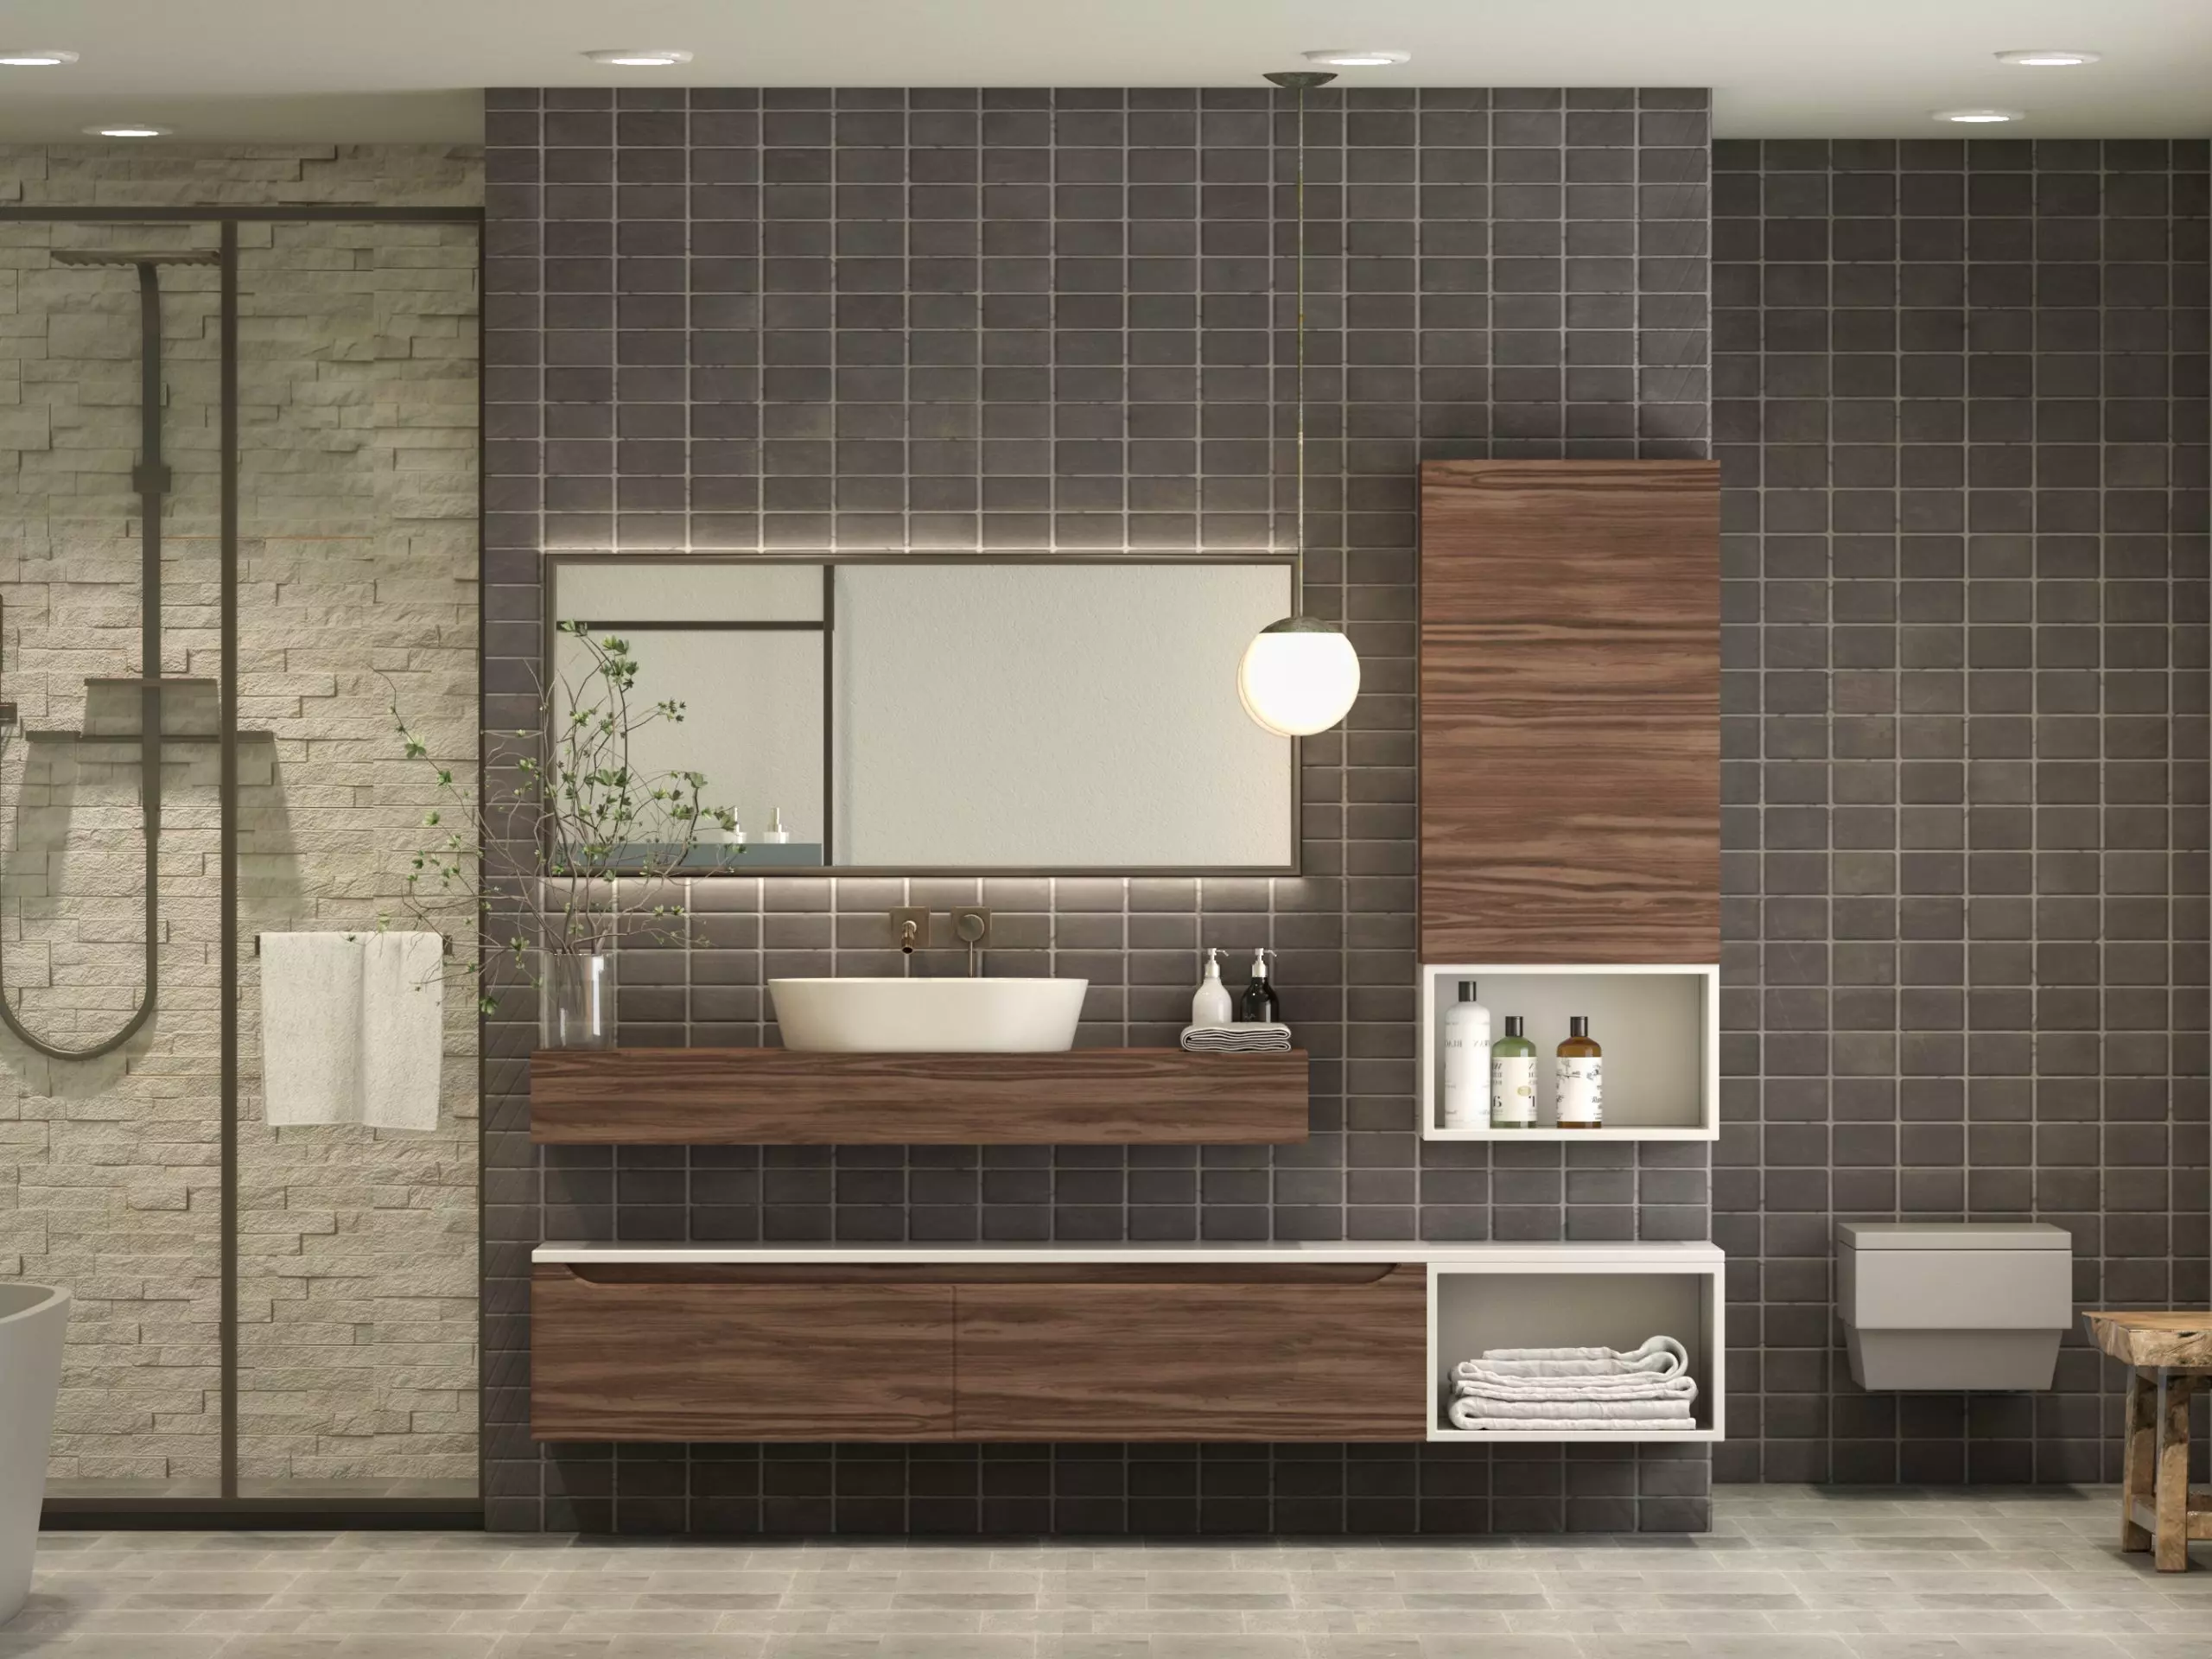 A modern bathroom with tiled walls and wooden cabinets.